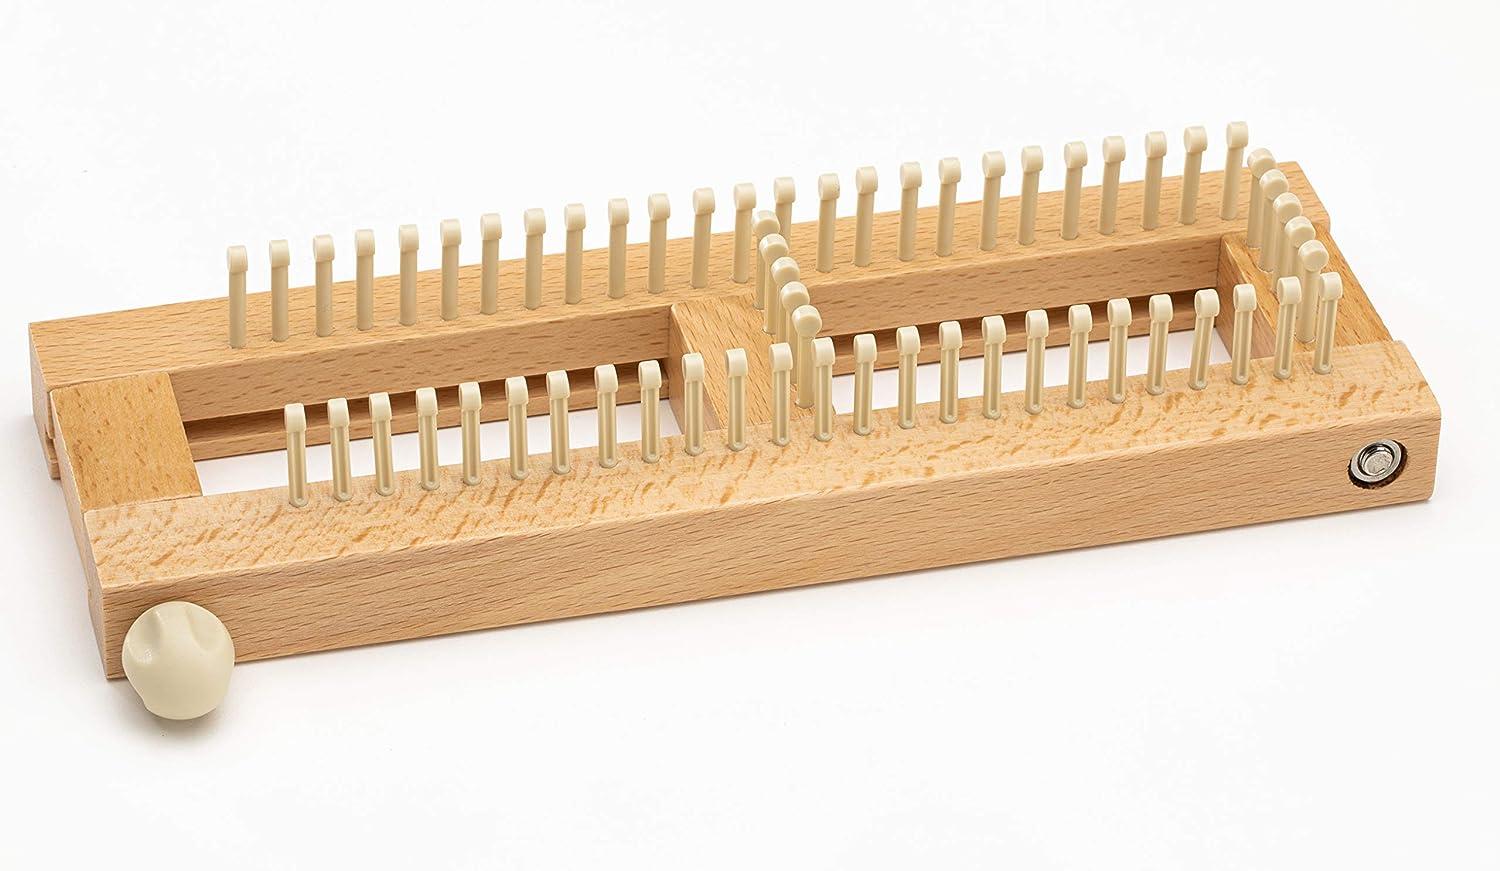 Authentic Knitting Board - Check out Pin Loom Weaving VIDEO on Flexee Loom  + 15% Off Flexee Looms!